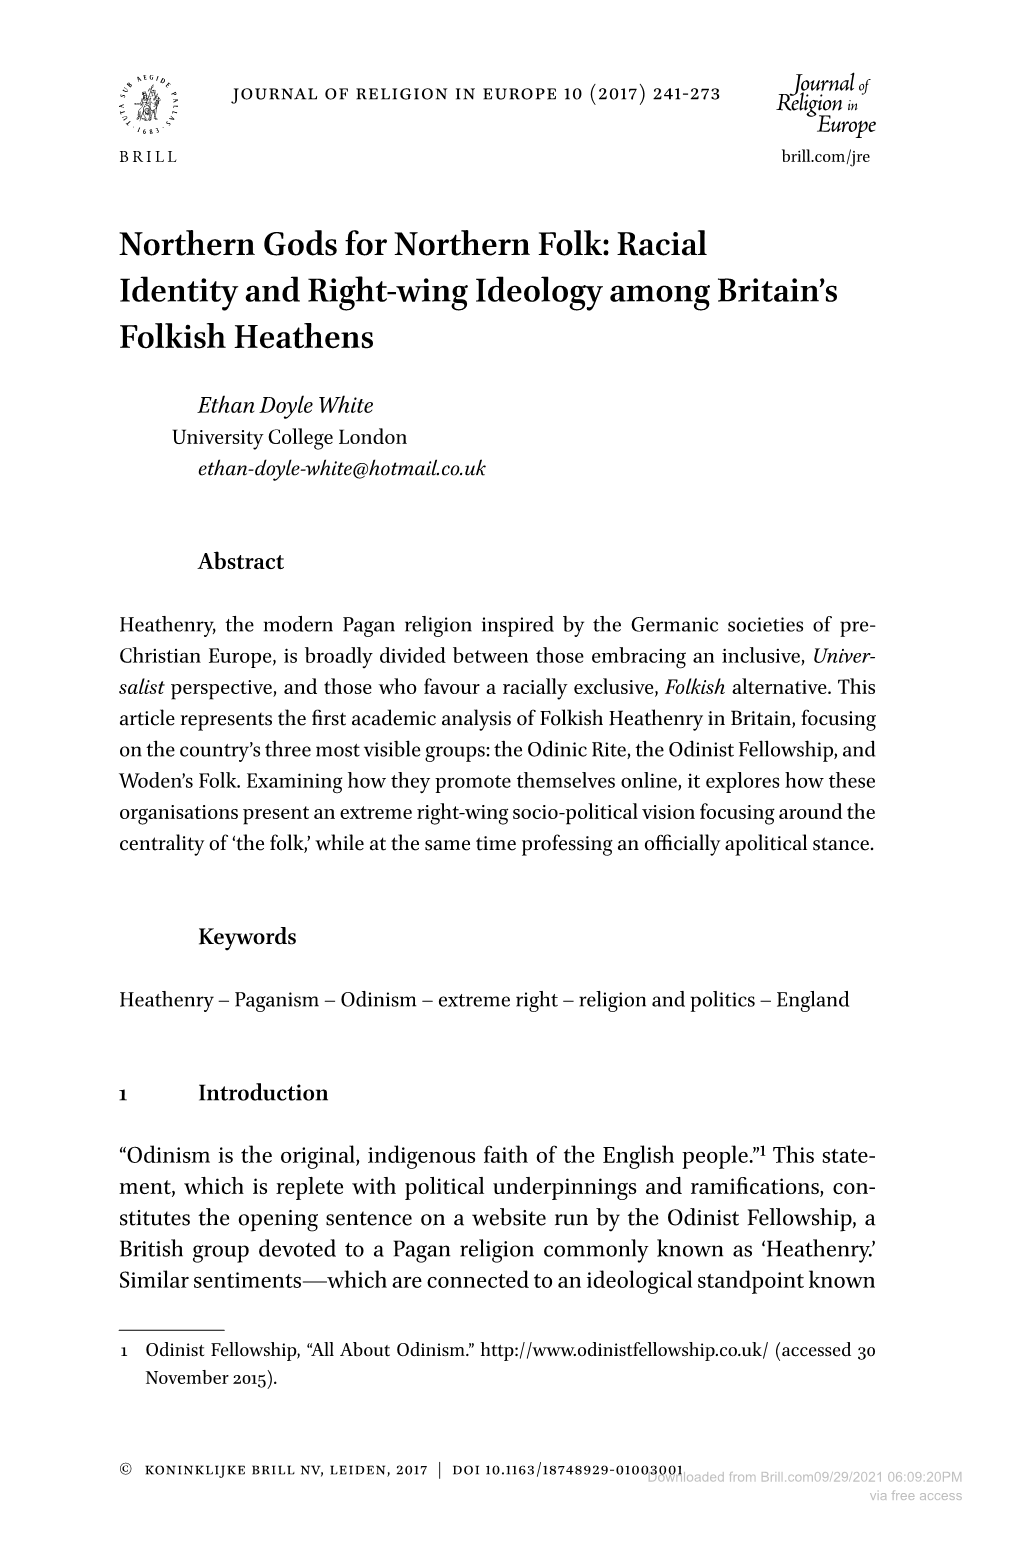 Racial Identity and Right-Wing Ideology Among Britain's Folkish Heathens